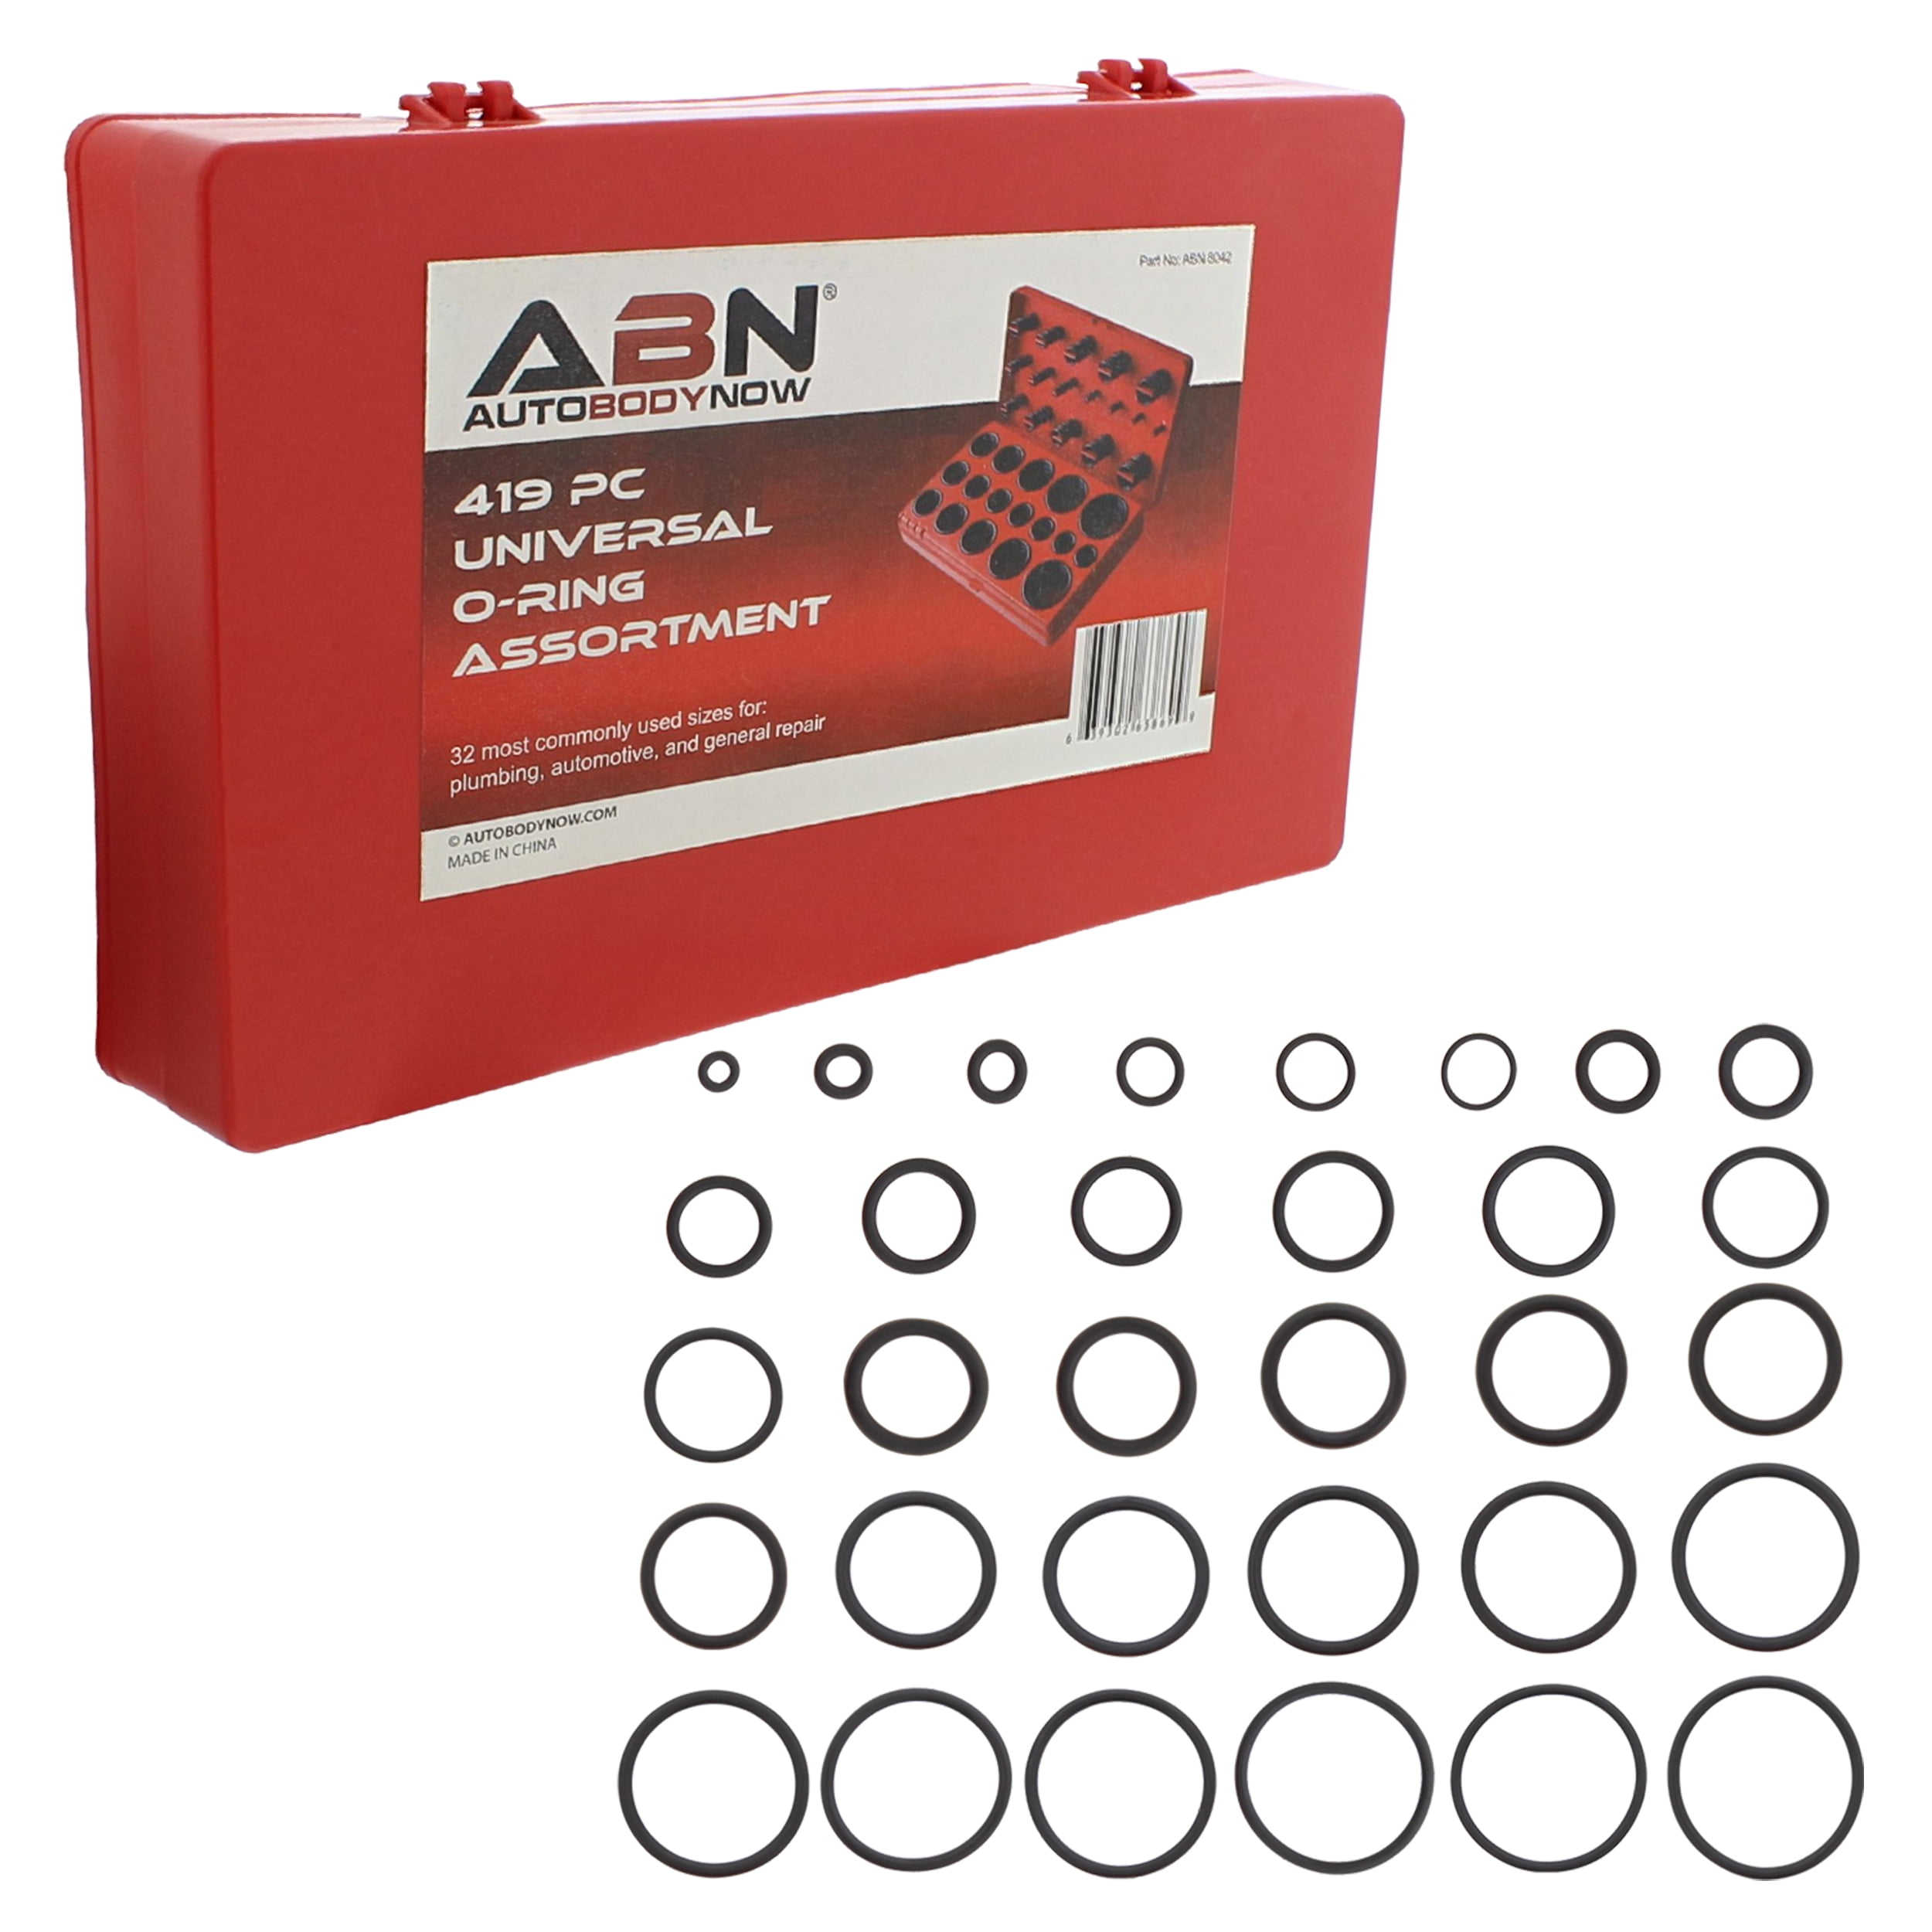 1200 Pcs O Ring Kit,24 Sizes Nitrile Rubber O Rings Assortment Kit for  Plumbing, Resist to Oil, Heat and High Pressure - Walmart.com